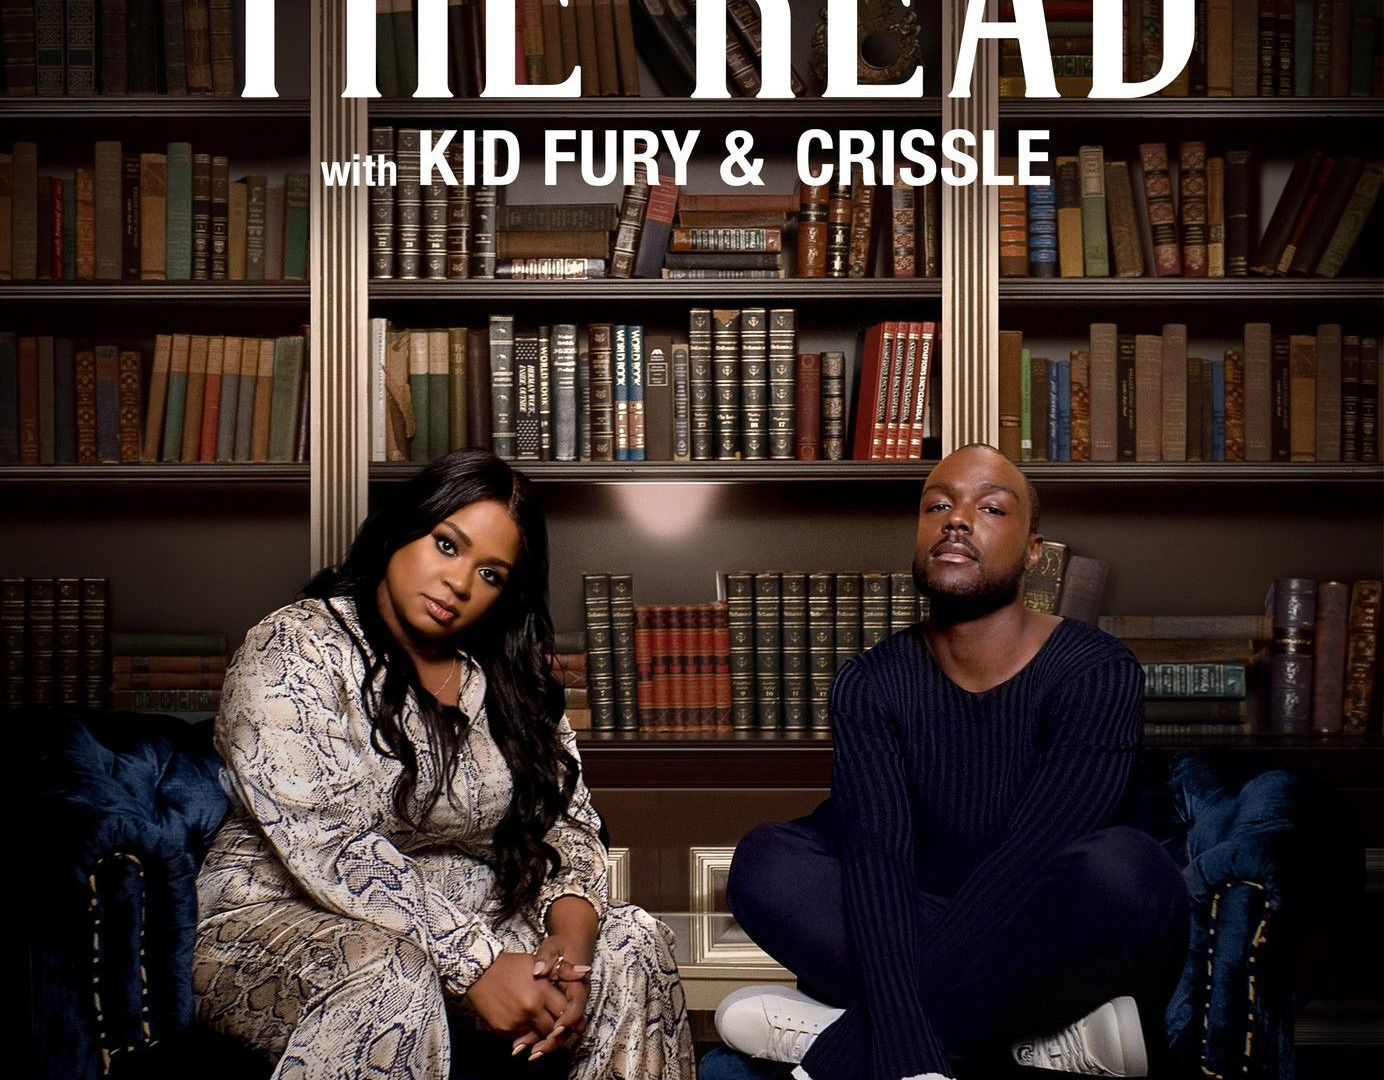 Show The Read with Kid Fury and Crissle